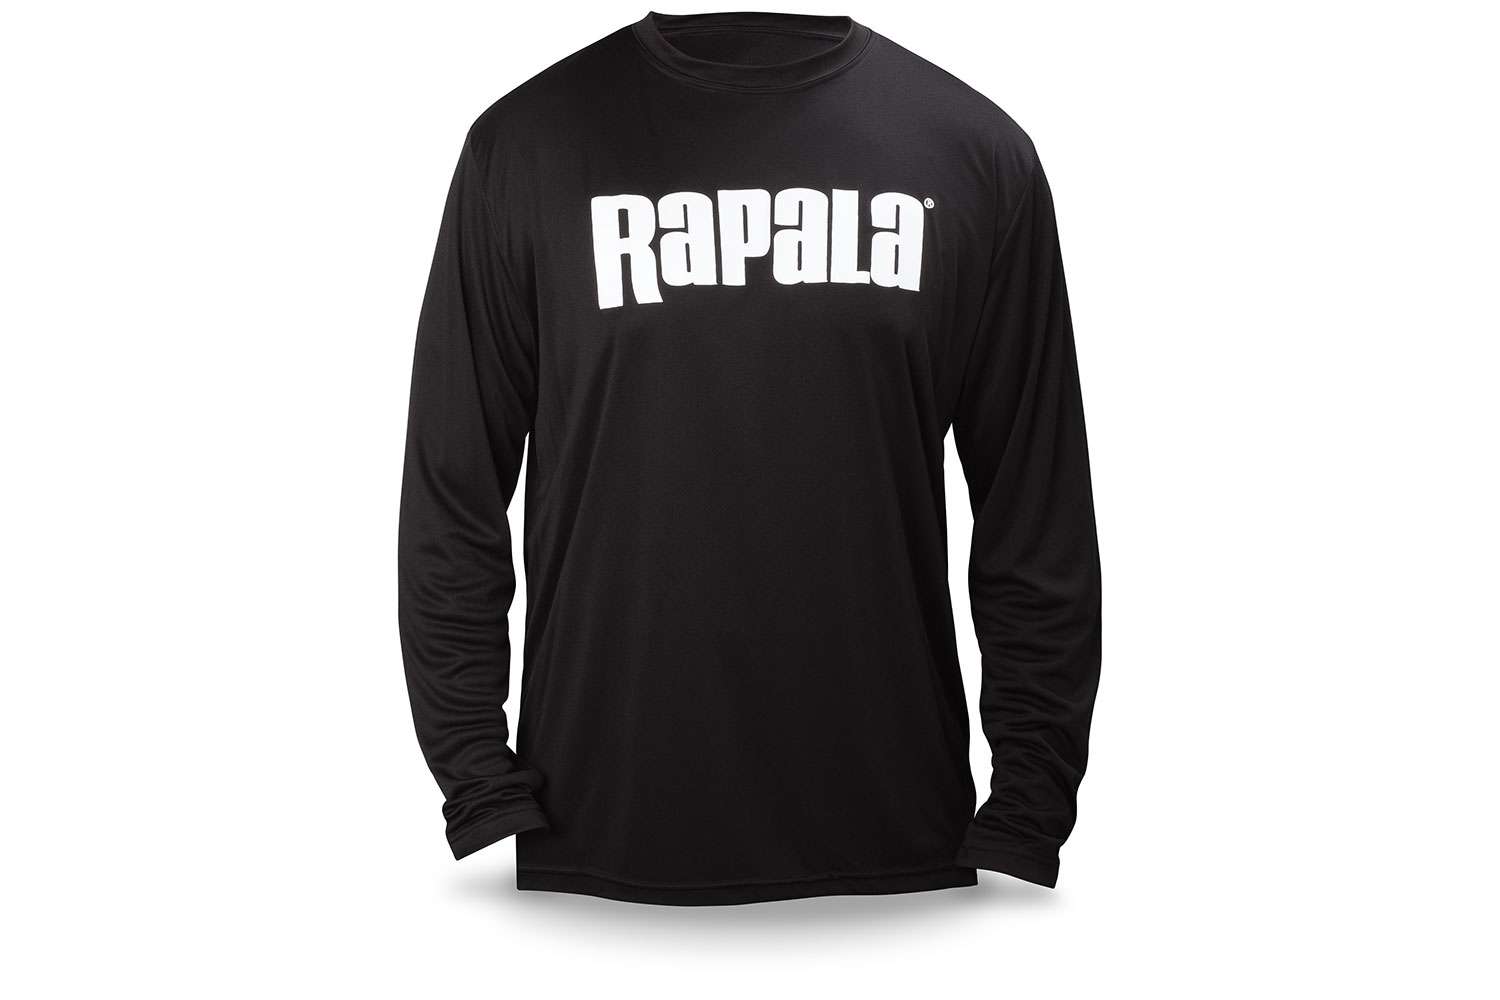   <B>Rapala Core Long Sleeve </B>
<BR>This is the best way to stay cool and comfortable on and off the water. This shirt offer style combined with function, UV (SPF 30) protection along with moisture-wicking and 100-percent polyester interlock for ultimate comfort. Available in six colors and sizes XS-XXL. 
<BR>
<B>MSRP: $24.99</B>